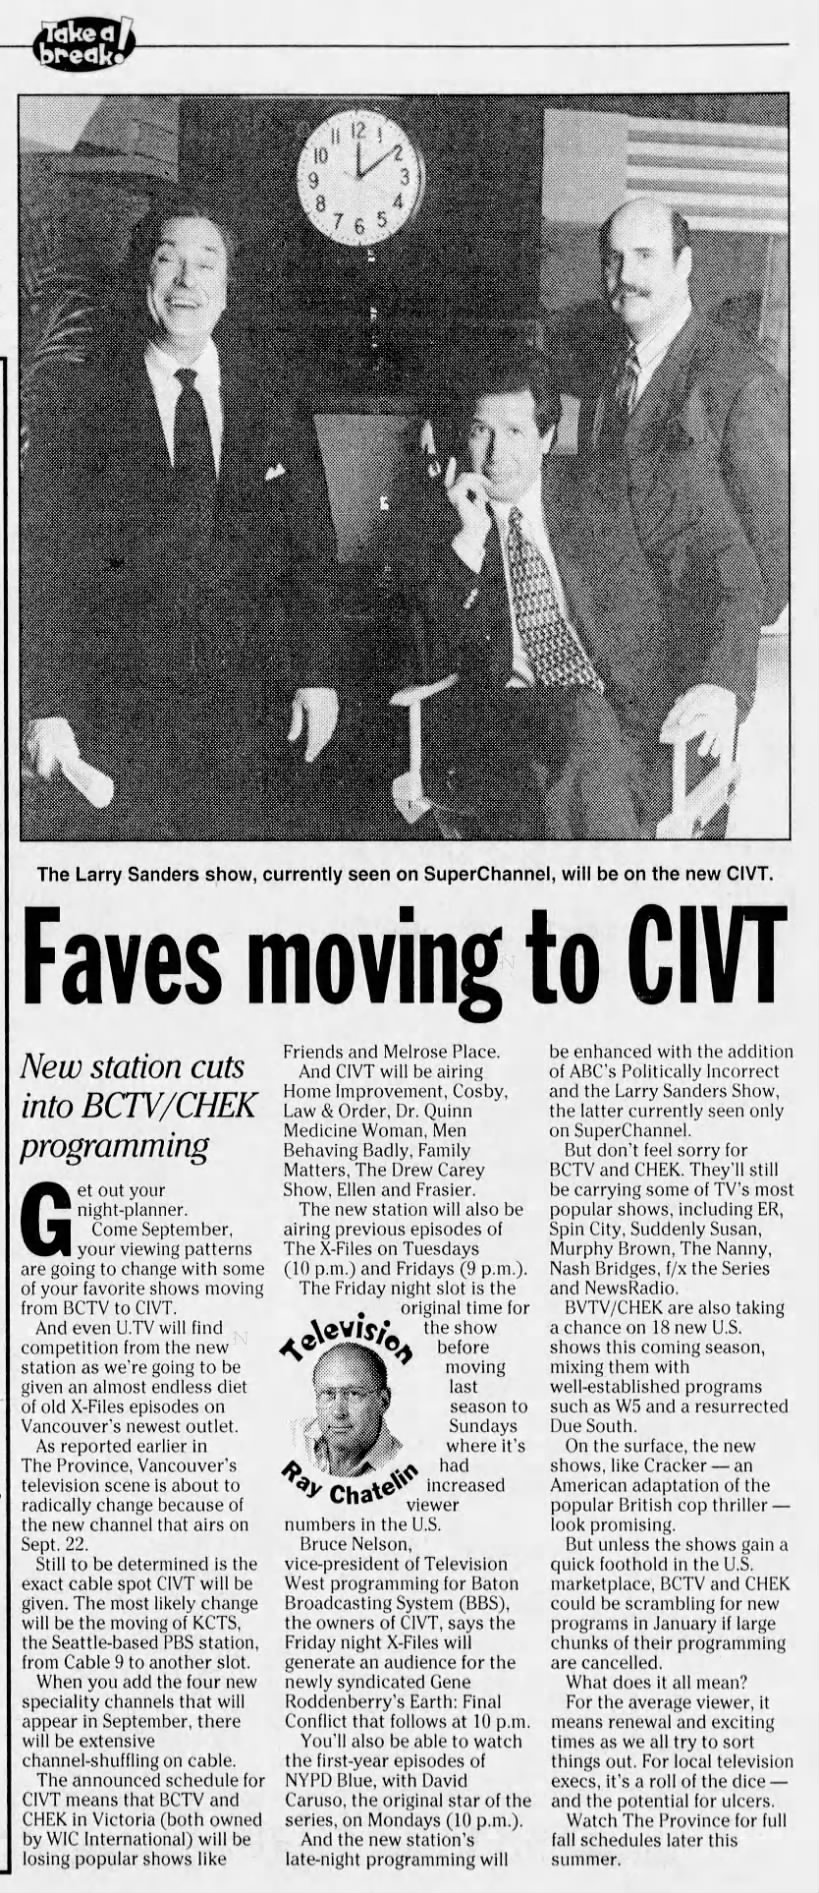 Faves moving to CIVT: New station cuts into BCTV/CHEK programming